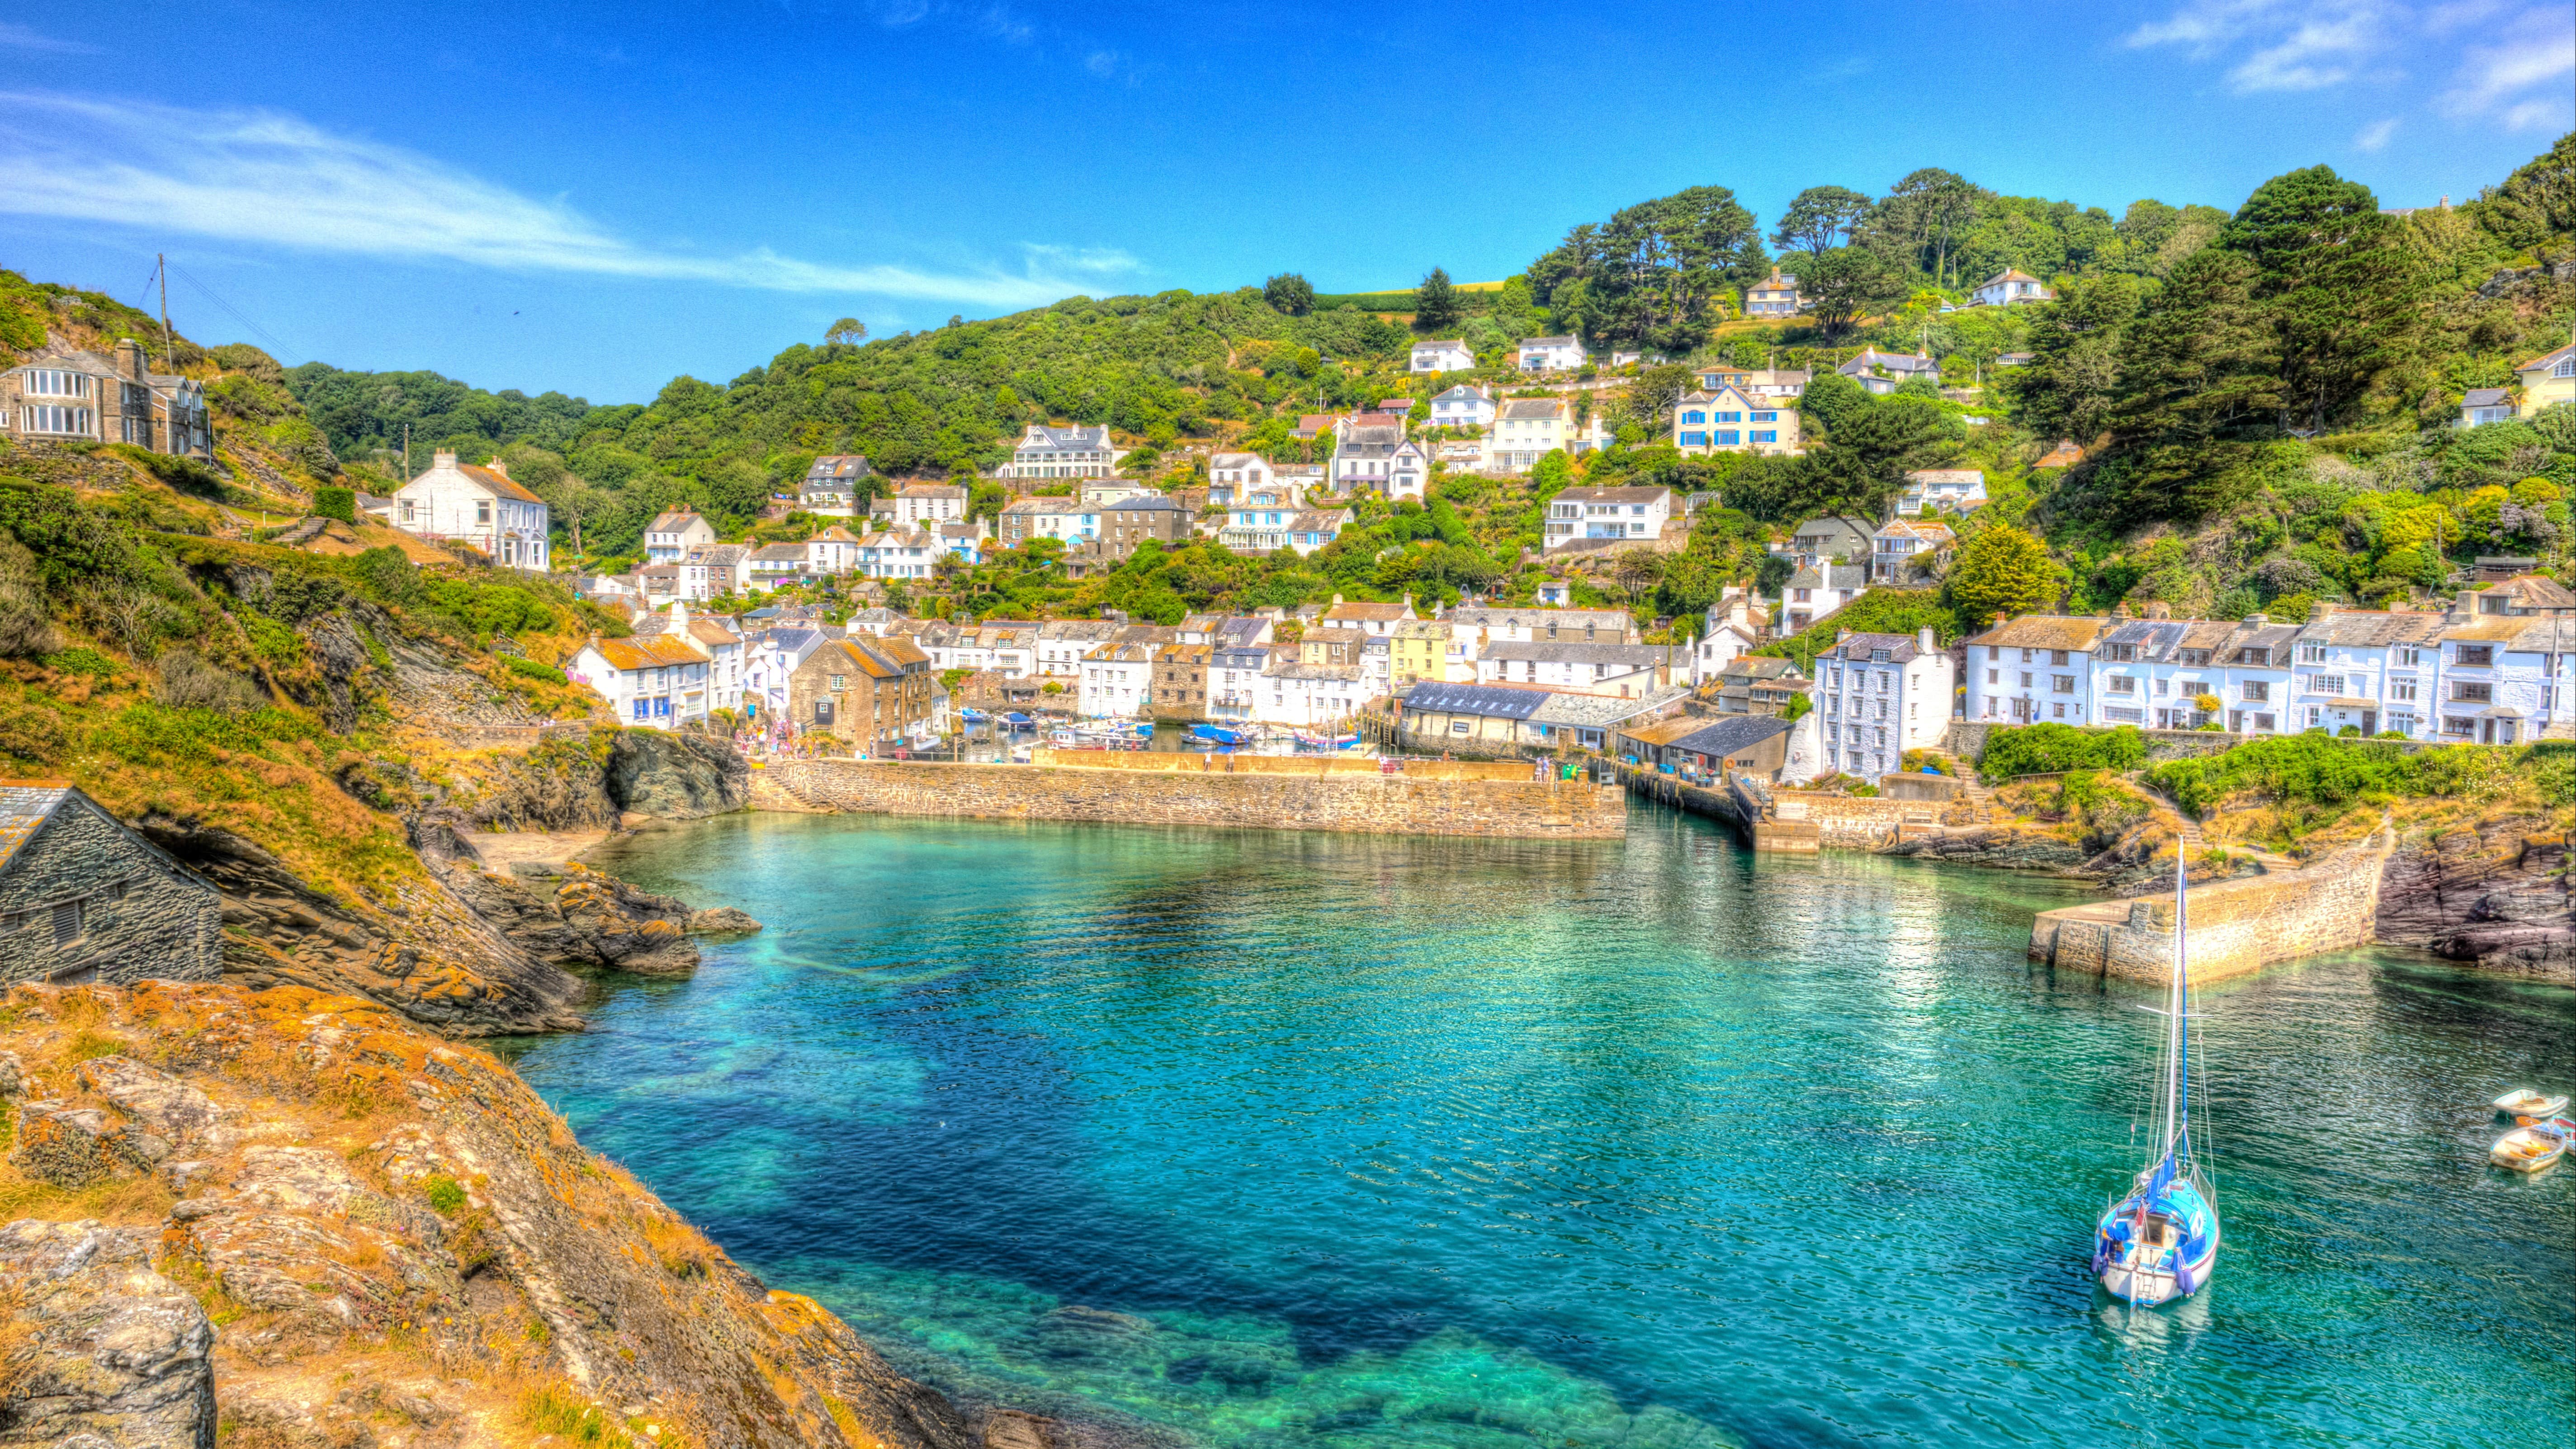 Explore an entire world of adventure on your family holidays in Cornwall